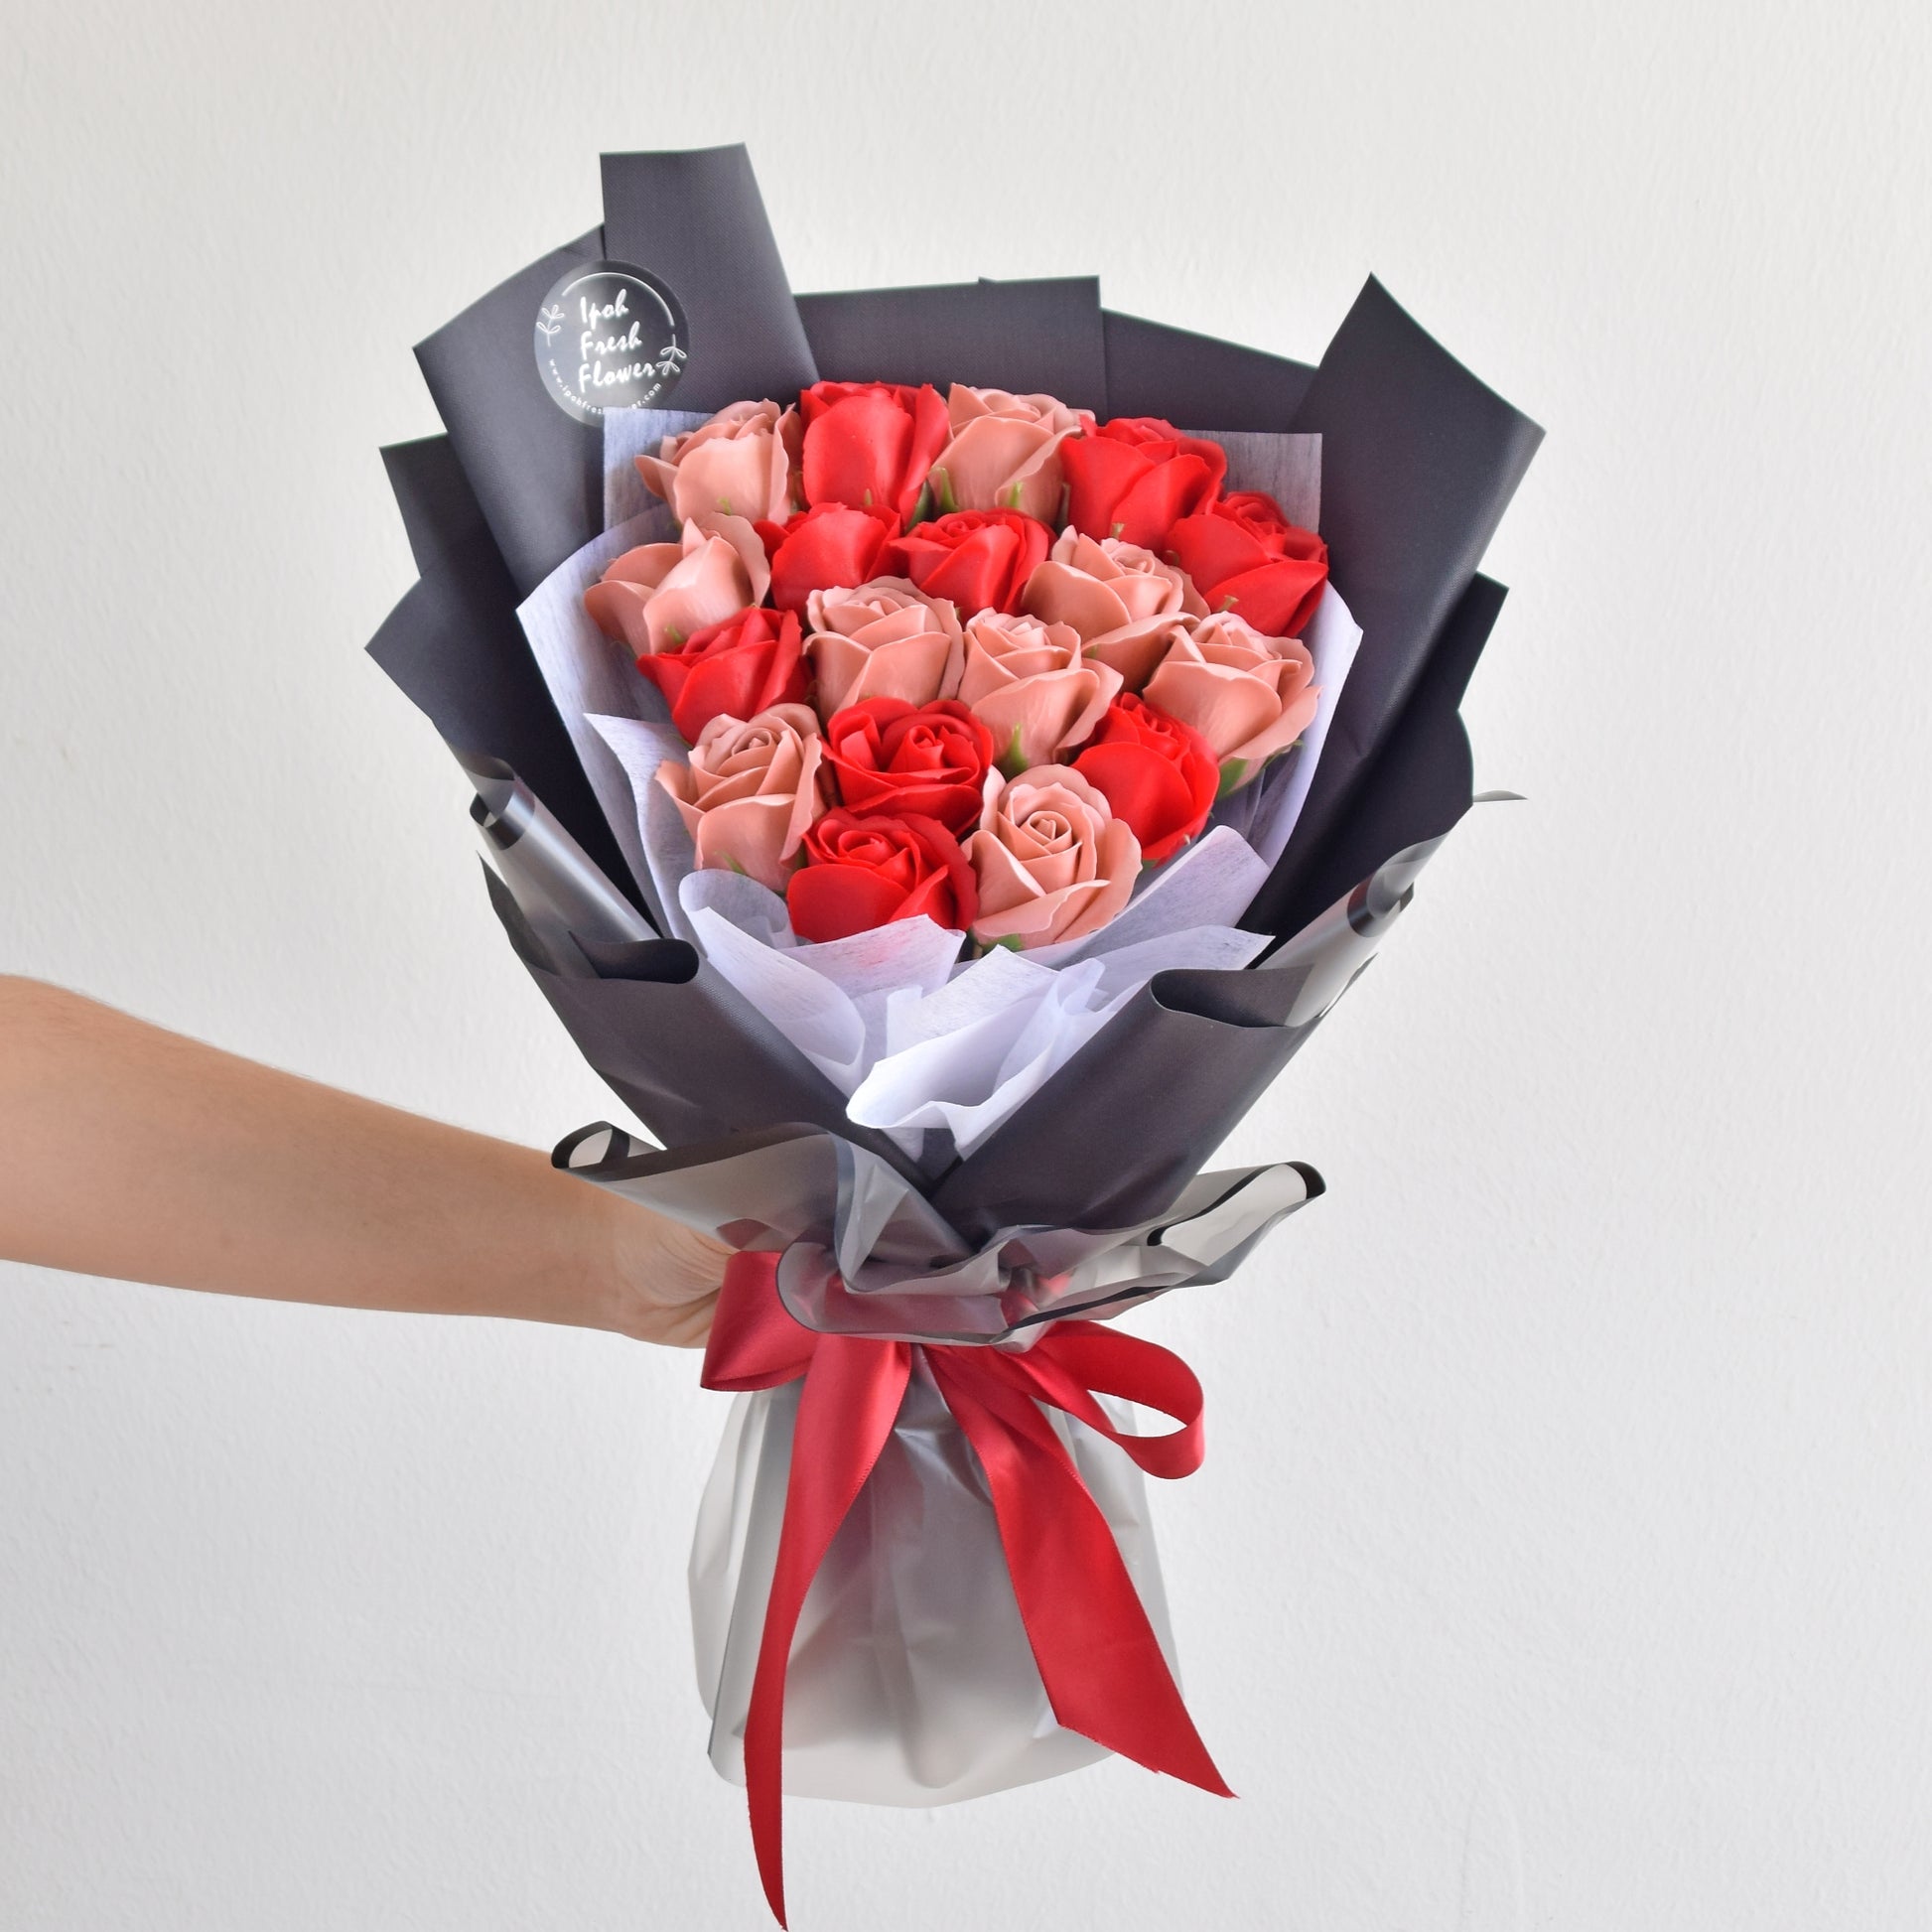 Clemmy| Soap Flowers Bouquet| Same Day Free Delivery